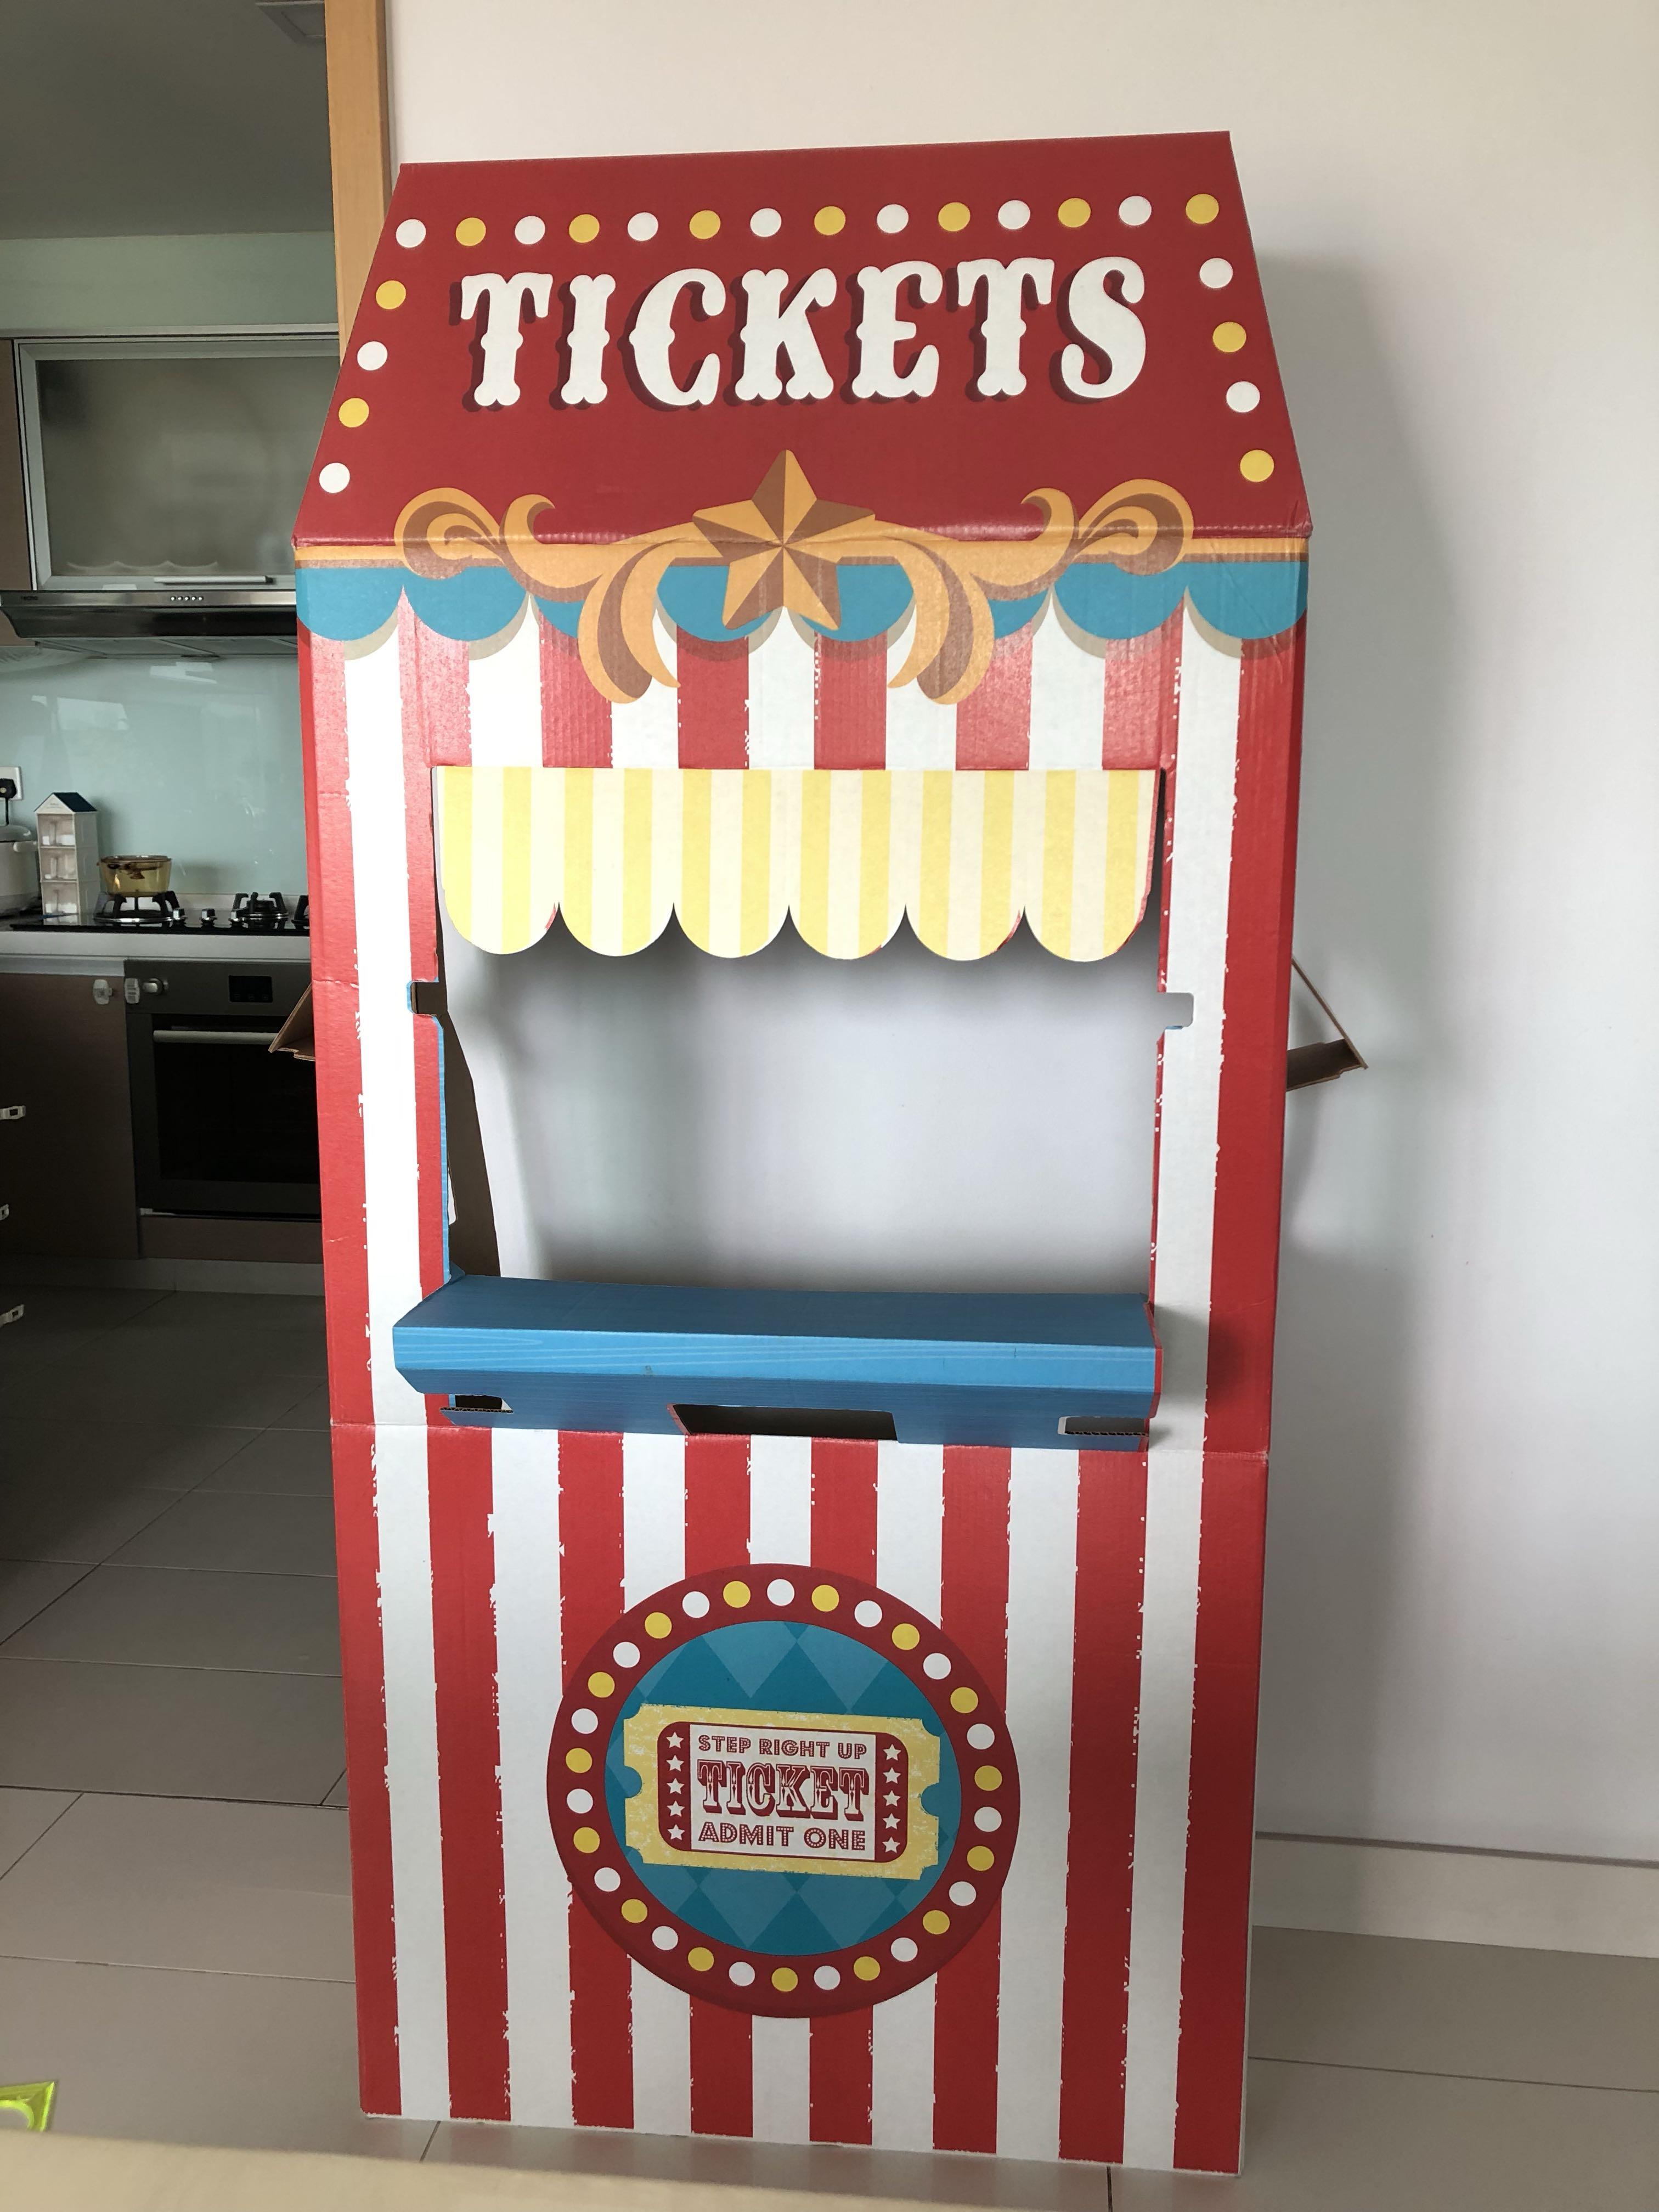 carnival-ticket-booth-cardboard-hobbies-toys-stationery-craft